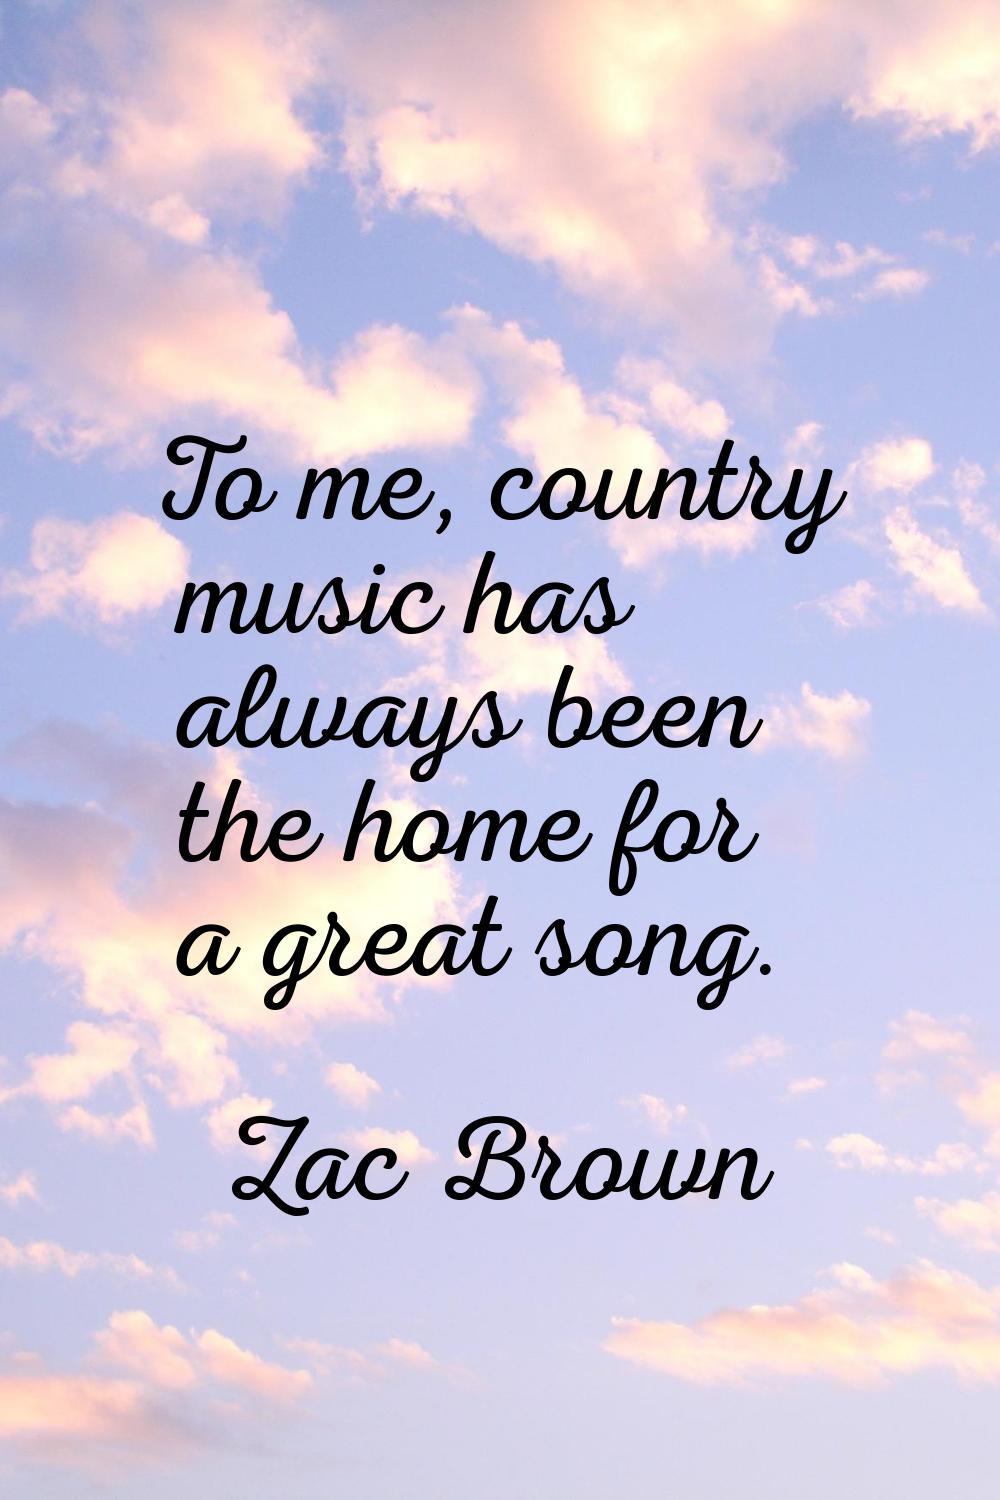 To me, country music has always been the home for a great song.